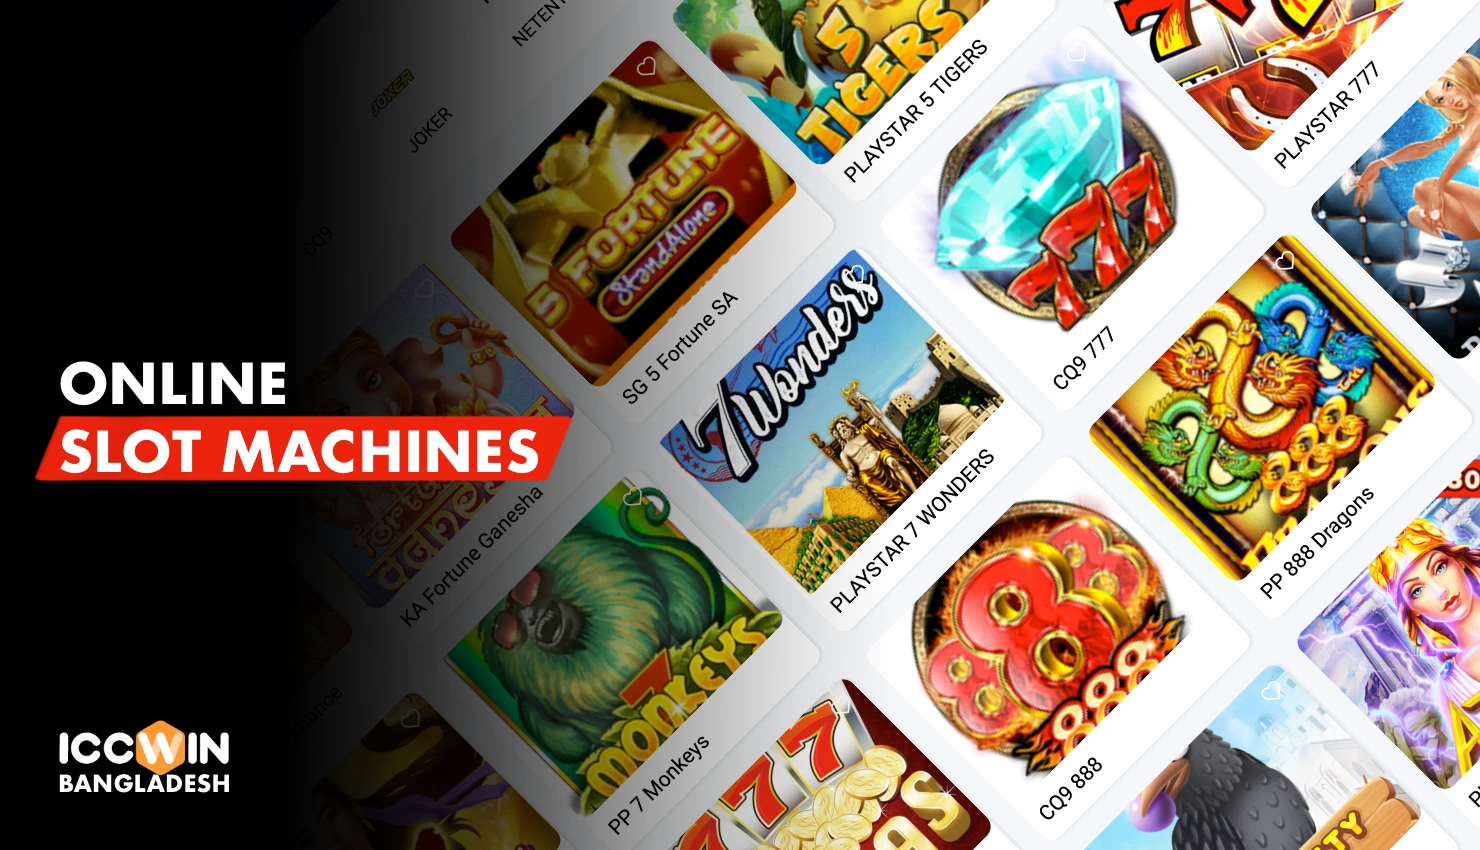 Play online slot machines on the platform Iccwin have fun and win real money